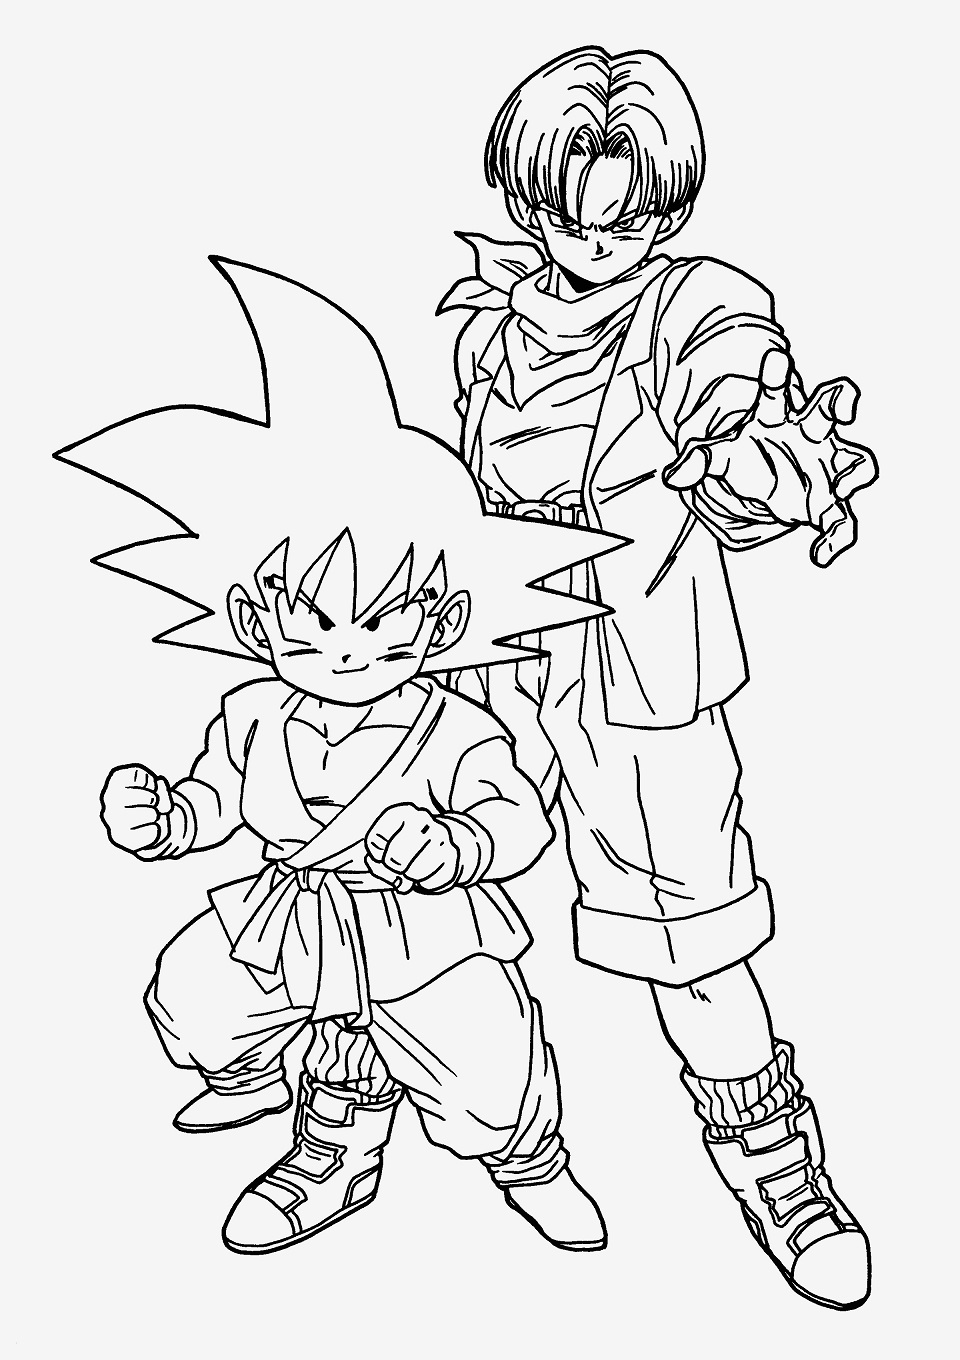 Cool Goten And Trunks Coloring Page - Free Printable Coloring Pages for Kids